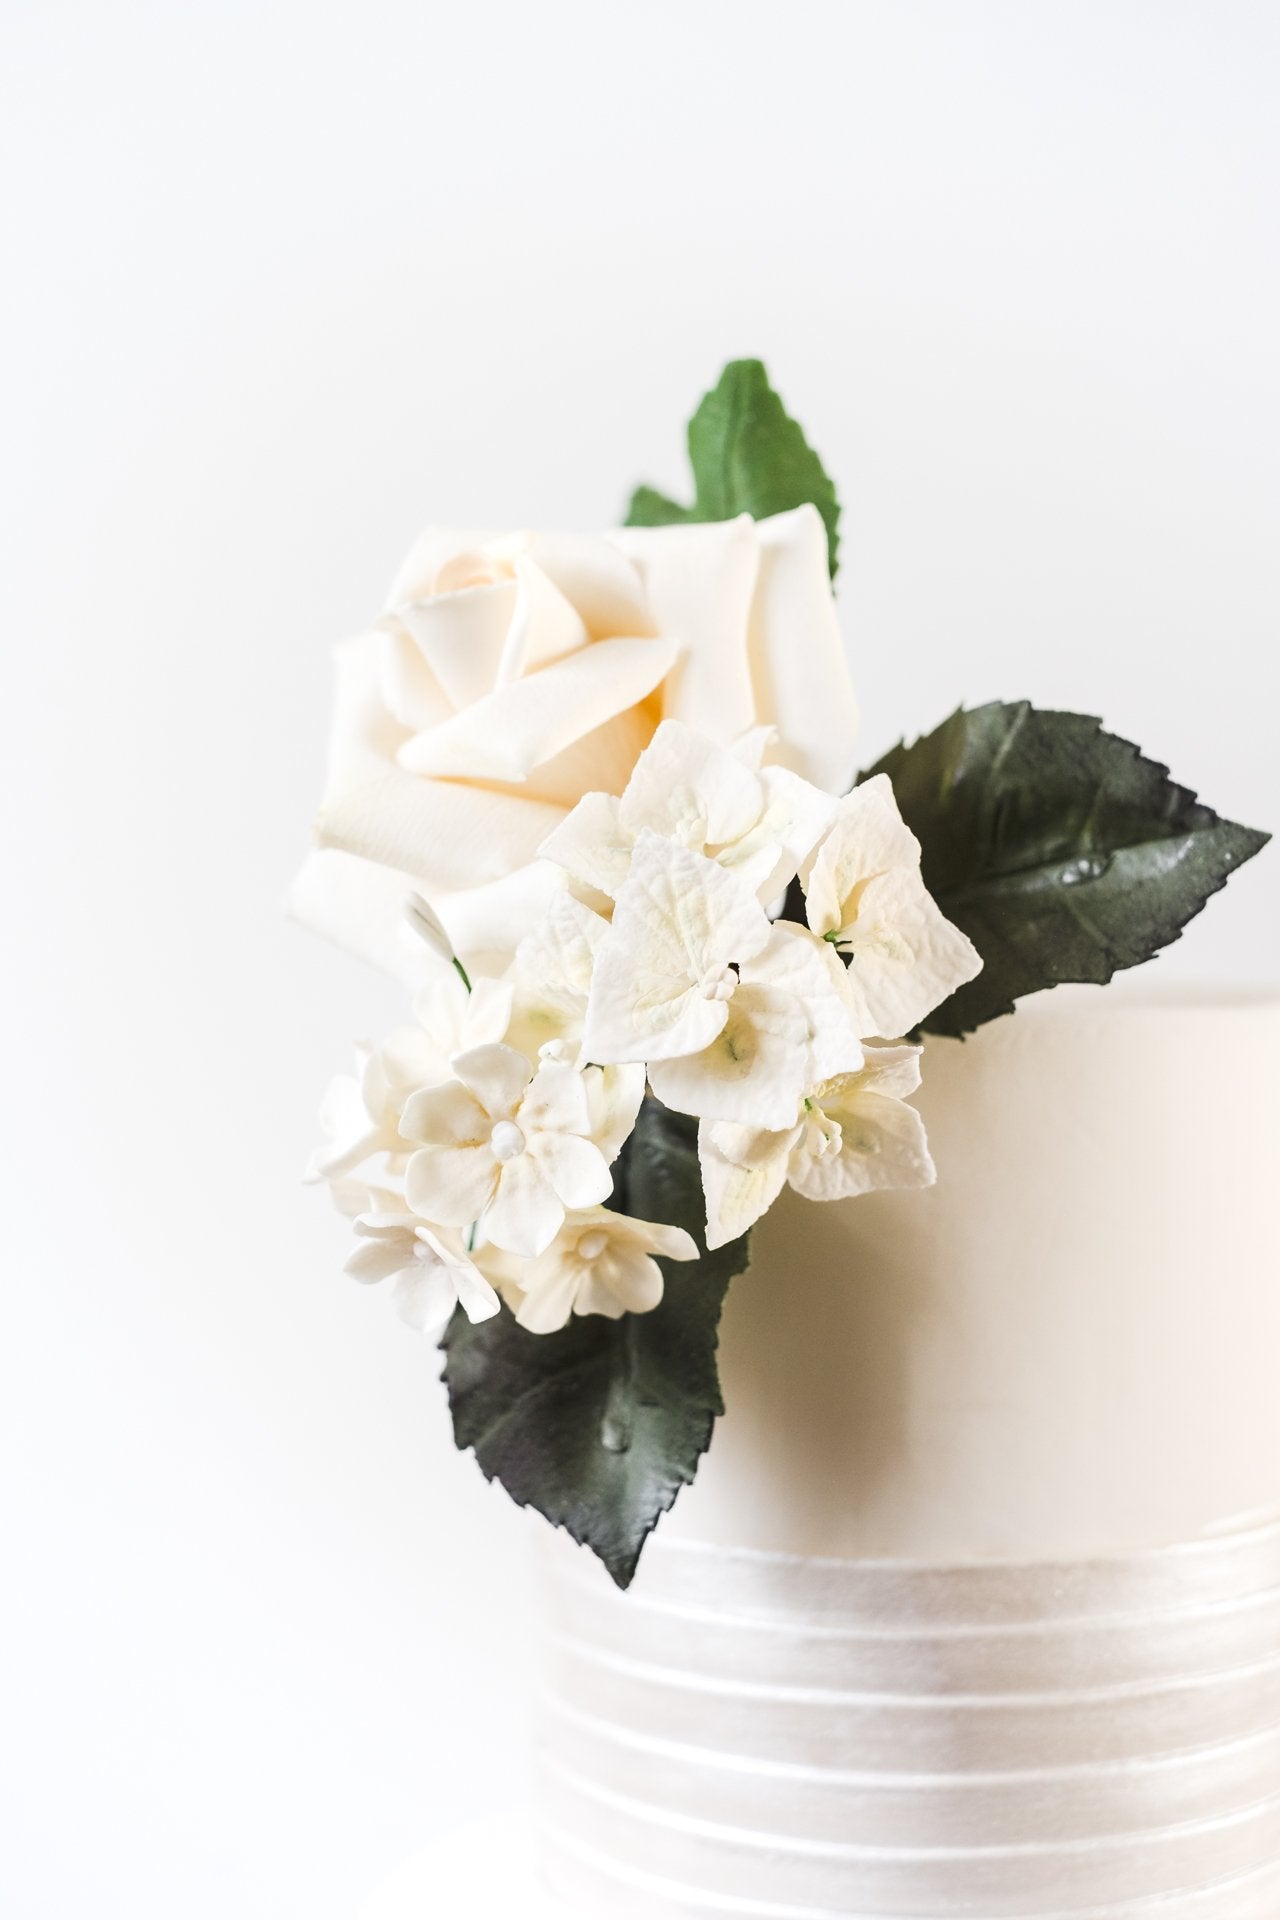 Top of contemporary ivory wedding cake with realistic white sugar rose, vivid green foliage and blossom flowers